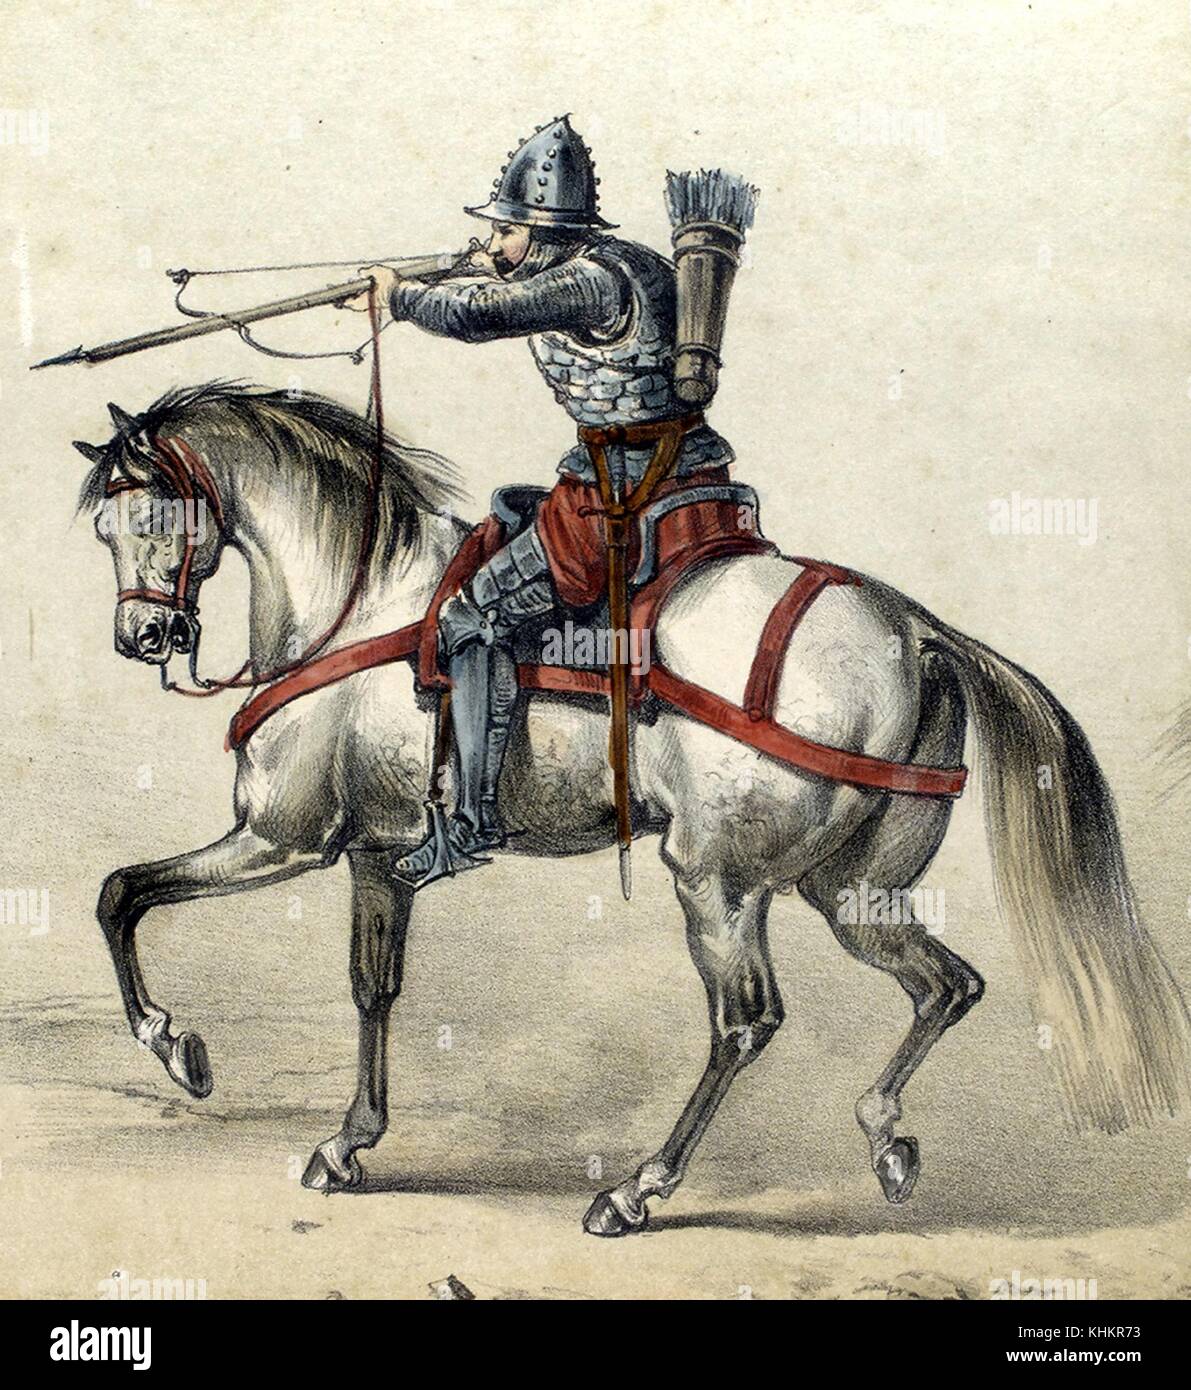 Color lithograph depicting a Spanish Army Ballestero (Soldier with Crossbow), from 1400, on horseback, from the book Album de la Caballeria Espanola, by General Conde de Clonard, 1861. From the New York Public Library. Stock Photo